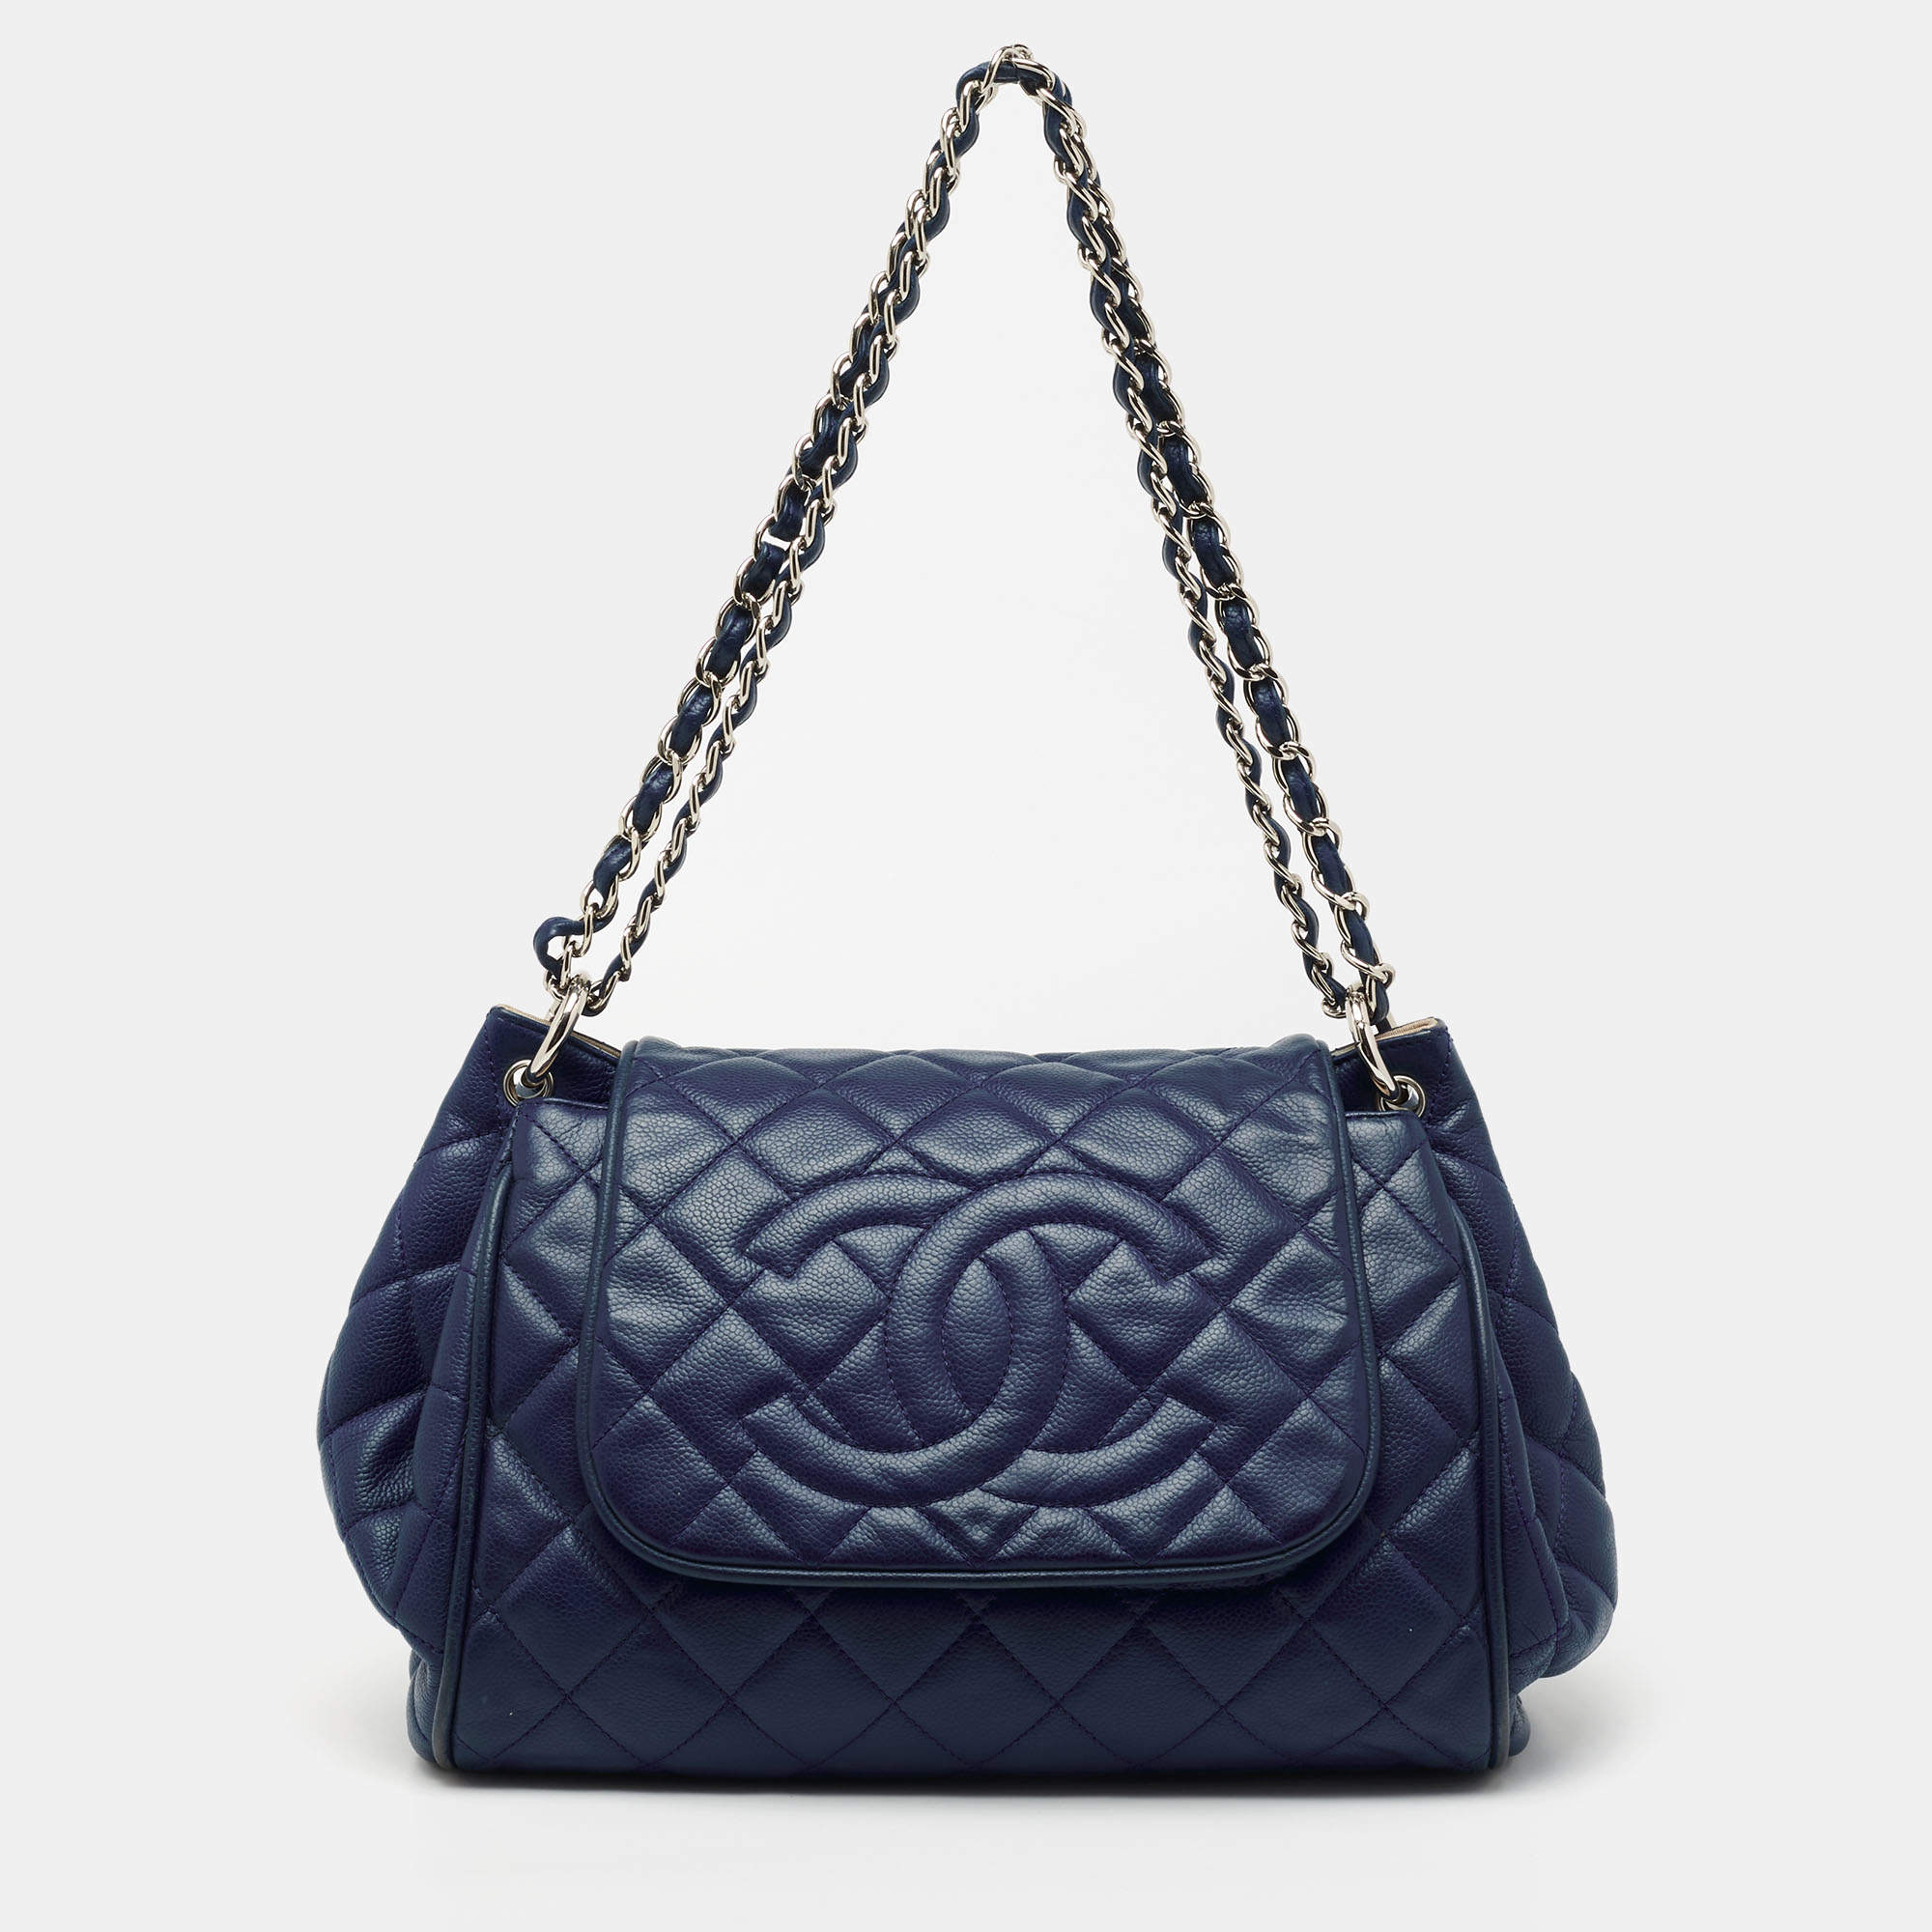 Chanel Navy Blue Quilted Caviar Leather Timeless Accordion Flap Bag